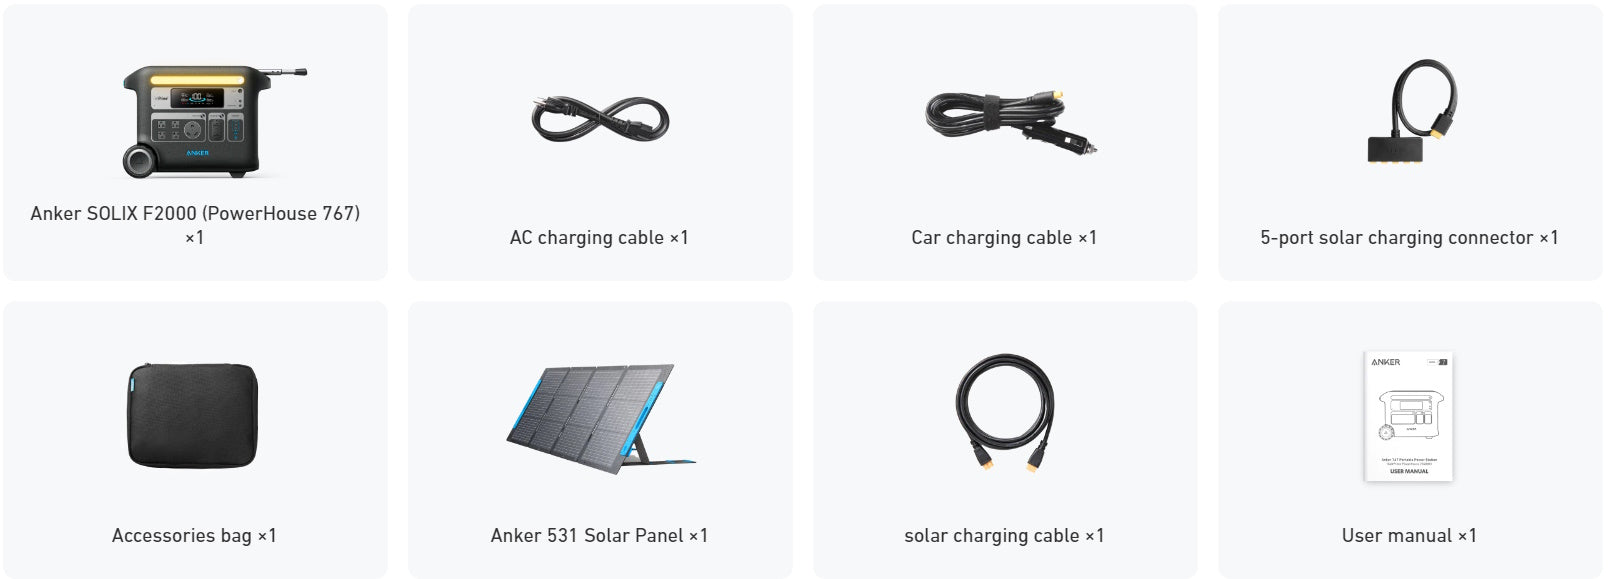 Anker SOLIX F2000 Portable Power Station Solar Generator And 200W Solar Panel Whats In The Box